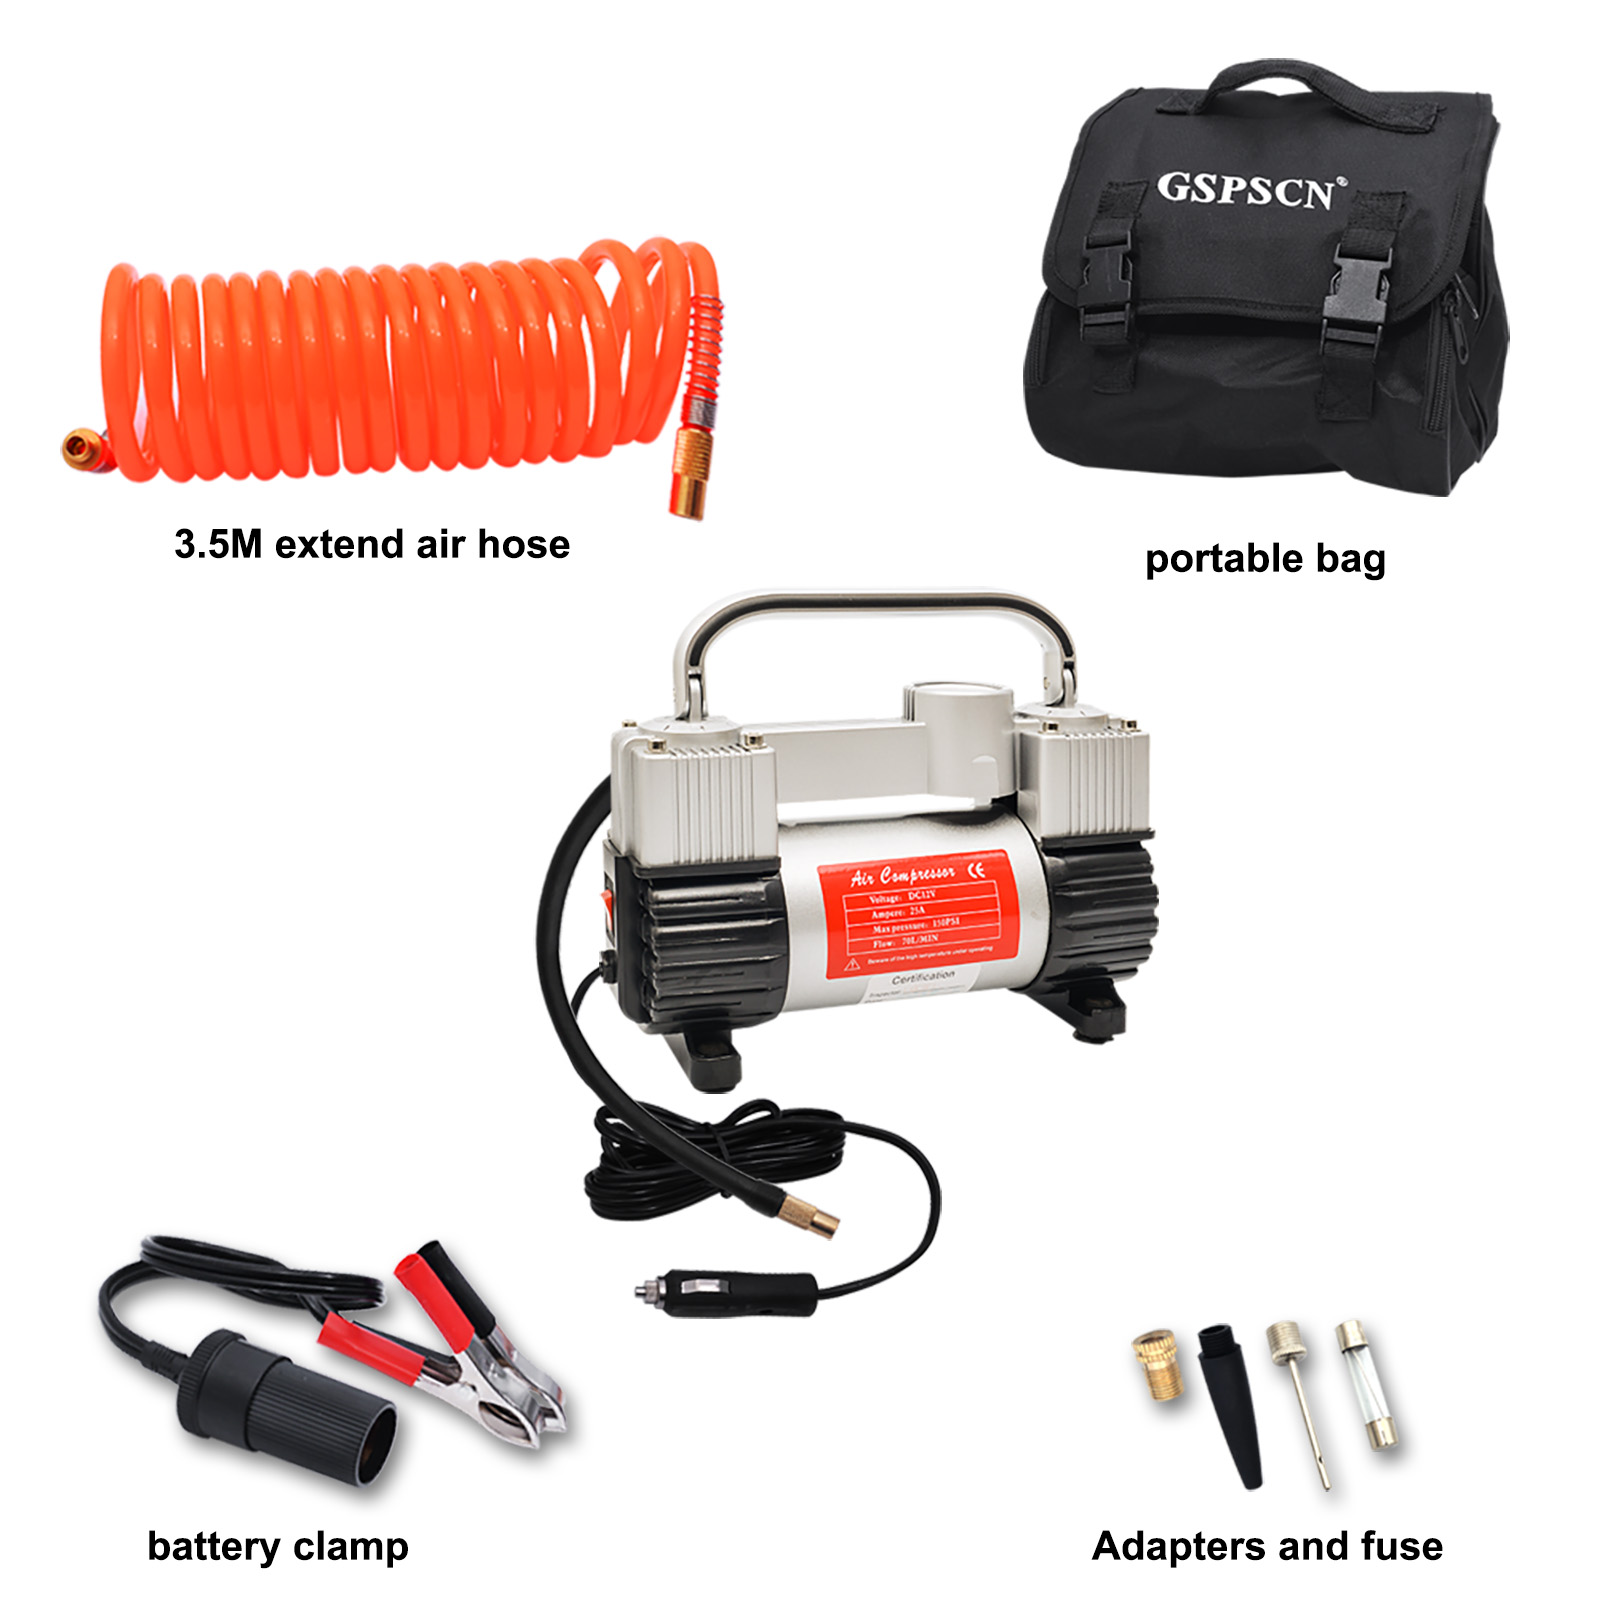 GSPSCN Portable Tire Inflator Heavy Duty Double Cylinders Metal 12V Air  Compressor Pump 150 PSI with Adapter for Car, Truck, SUV Tires, Dinghy, Air  Bed Etc